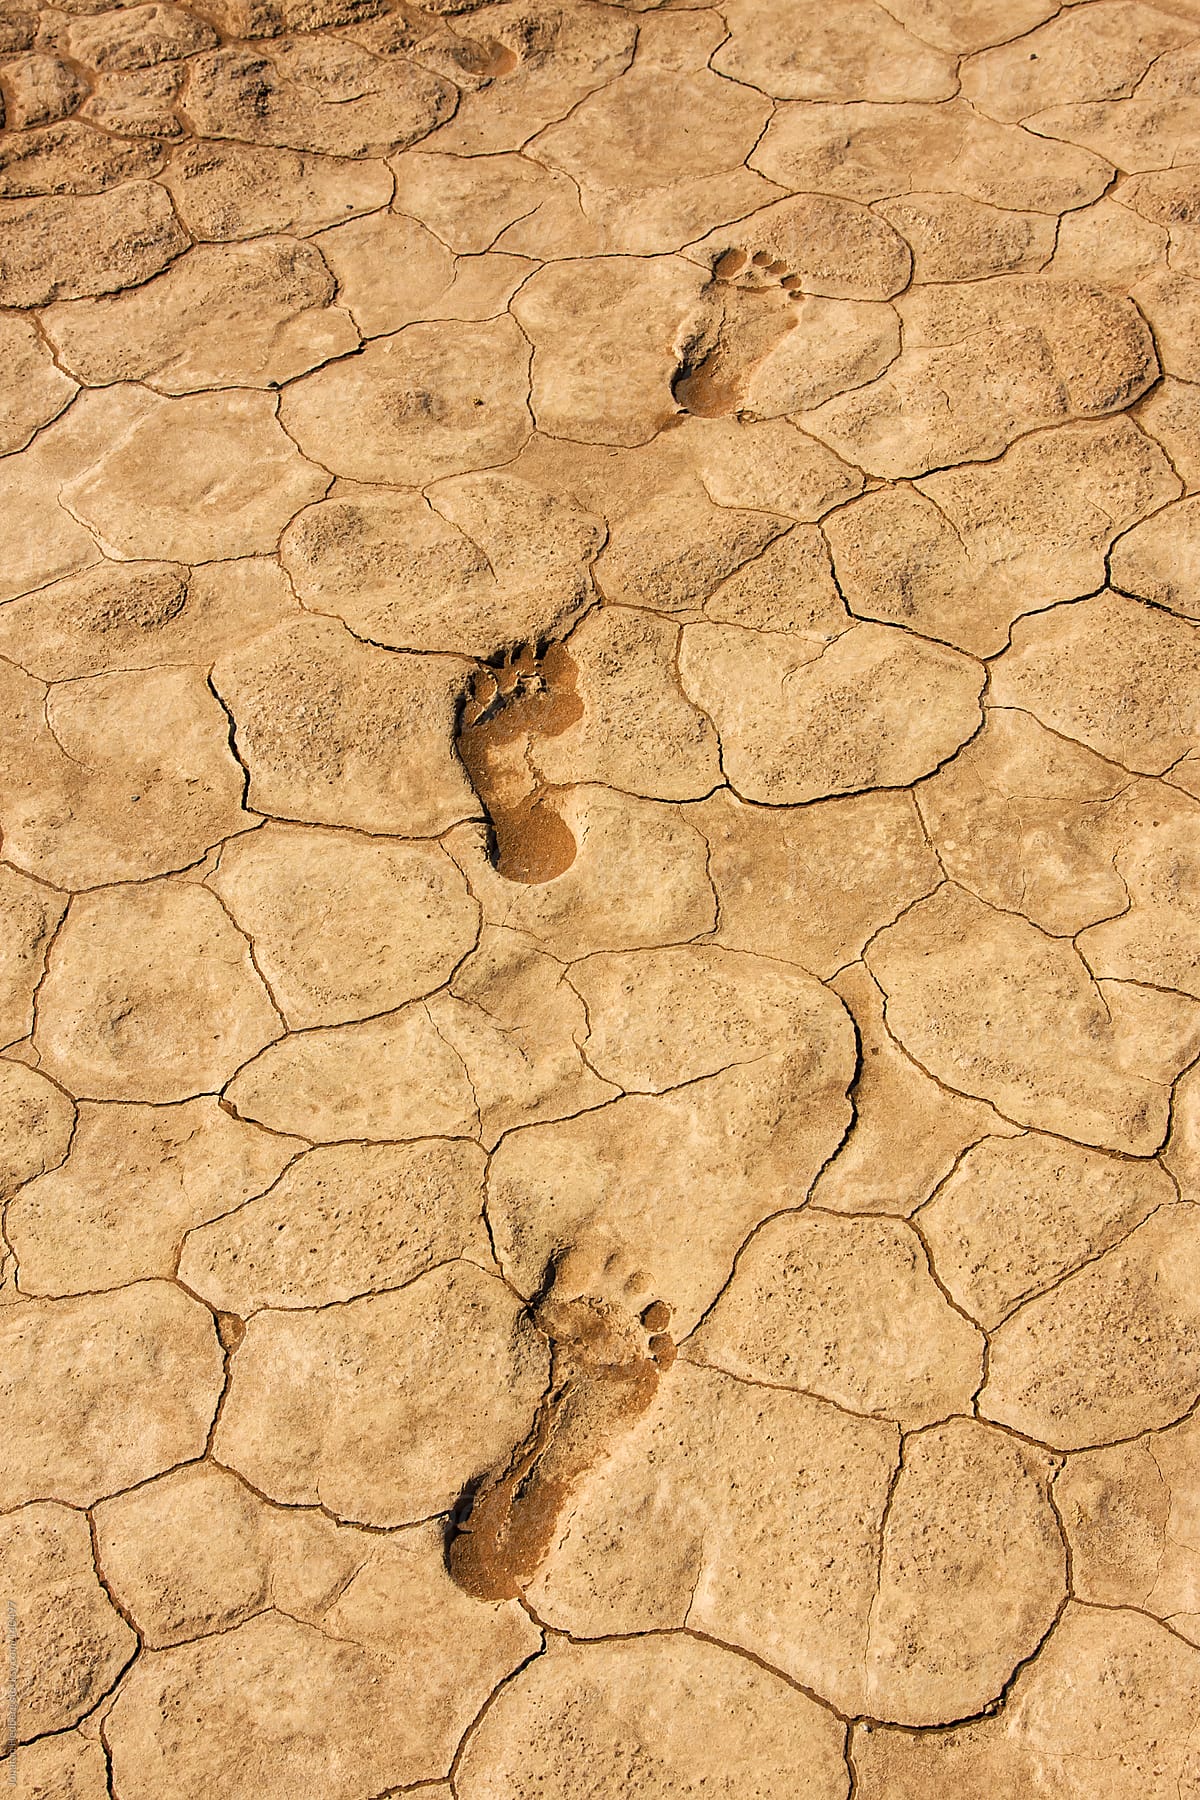 Footprints in the parched ground